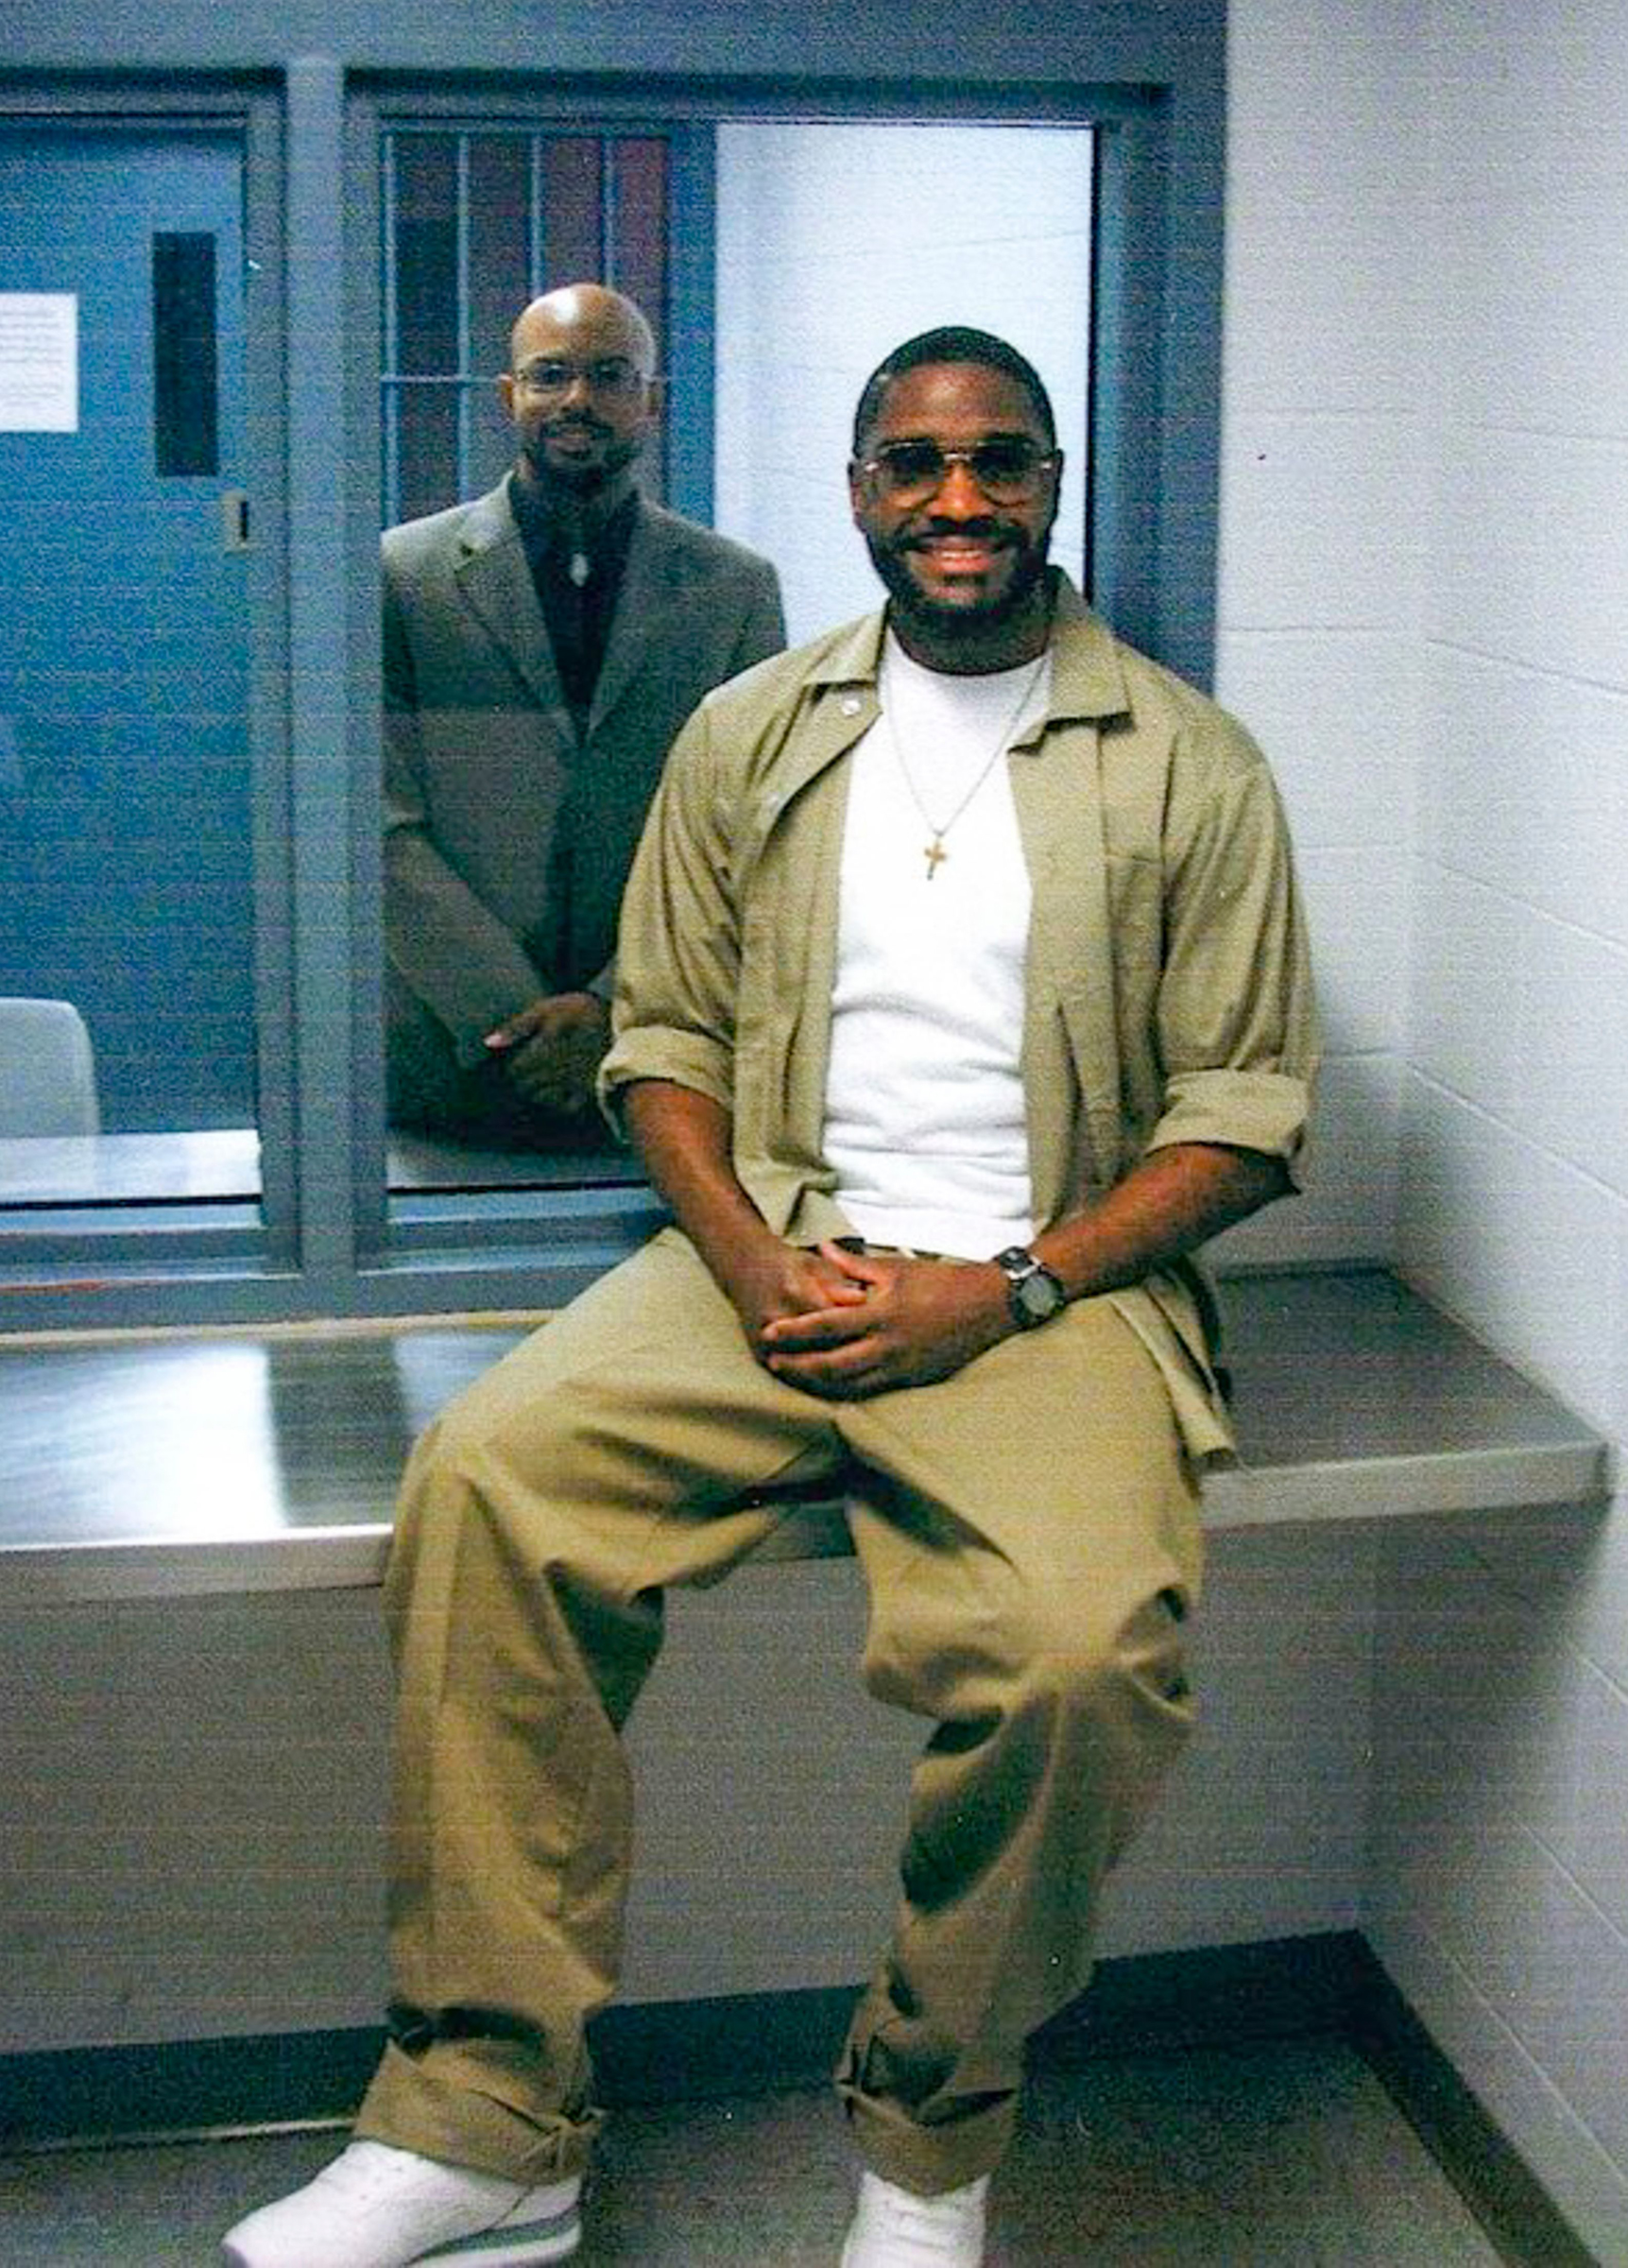 Federal inmate Brandon Bernard, right, with Pastor Aaron Chancy, left, as Bernard as he waited his scheduled execution in Terre Haute, Ind. Bernard was executed on Dec. 10. (EPA/Shutterstock)